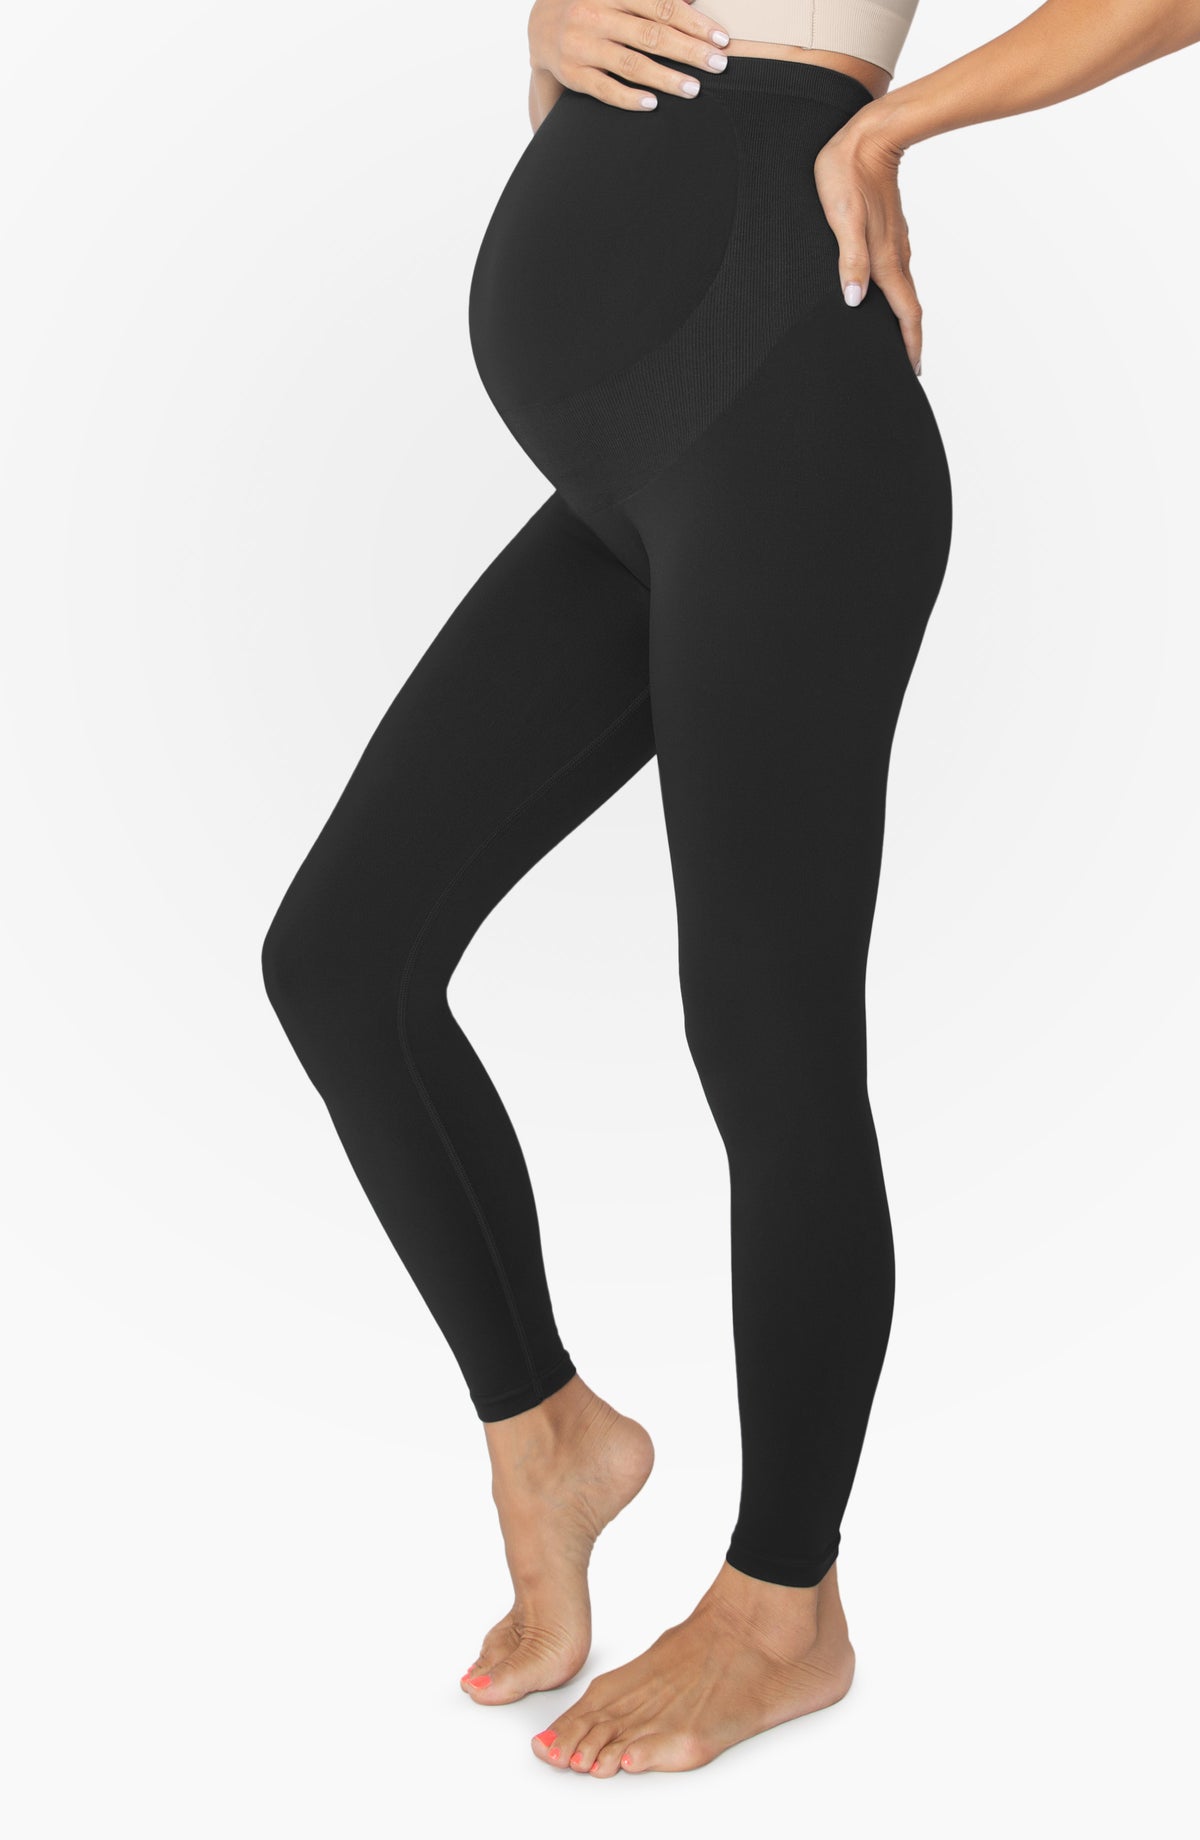 Bump & Me - Made for your comfort and all day support, the Carriwell Maternity  Support Leggings come in a stretch fabric which is silky soft and  breathable making them ideal for